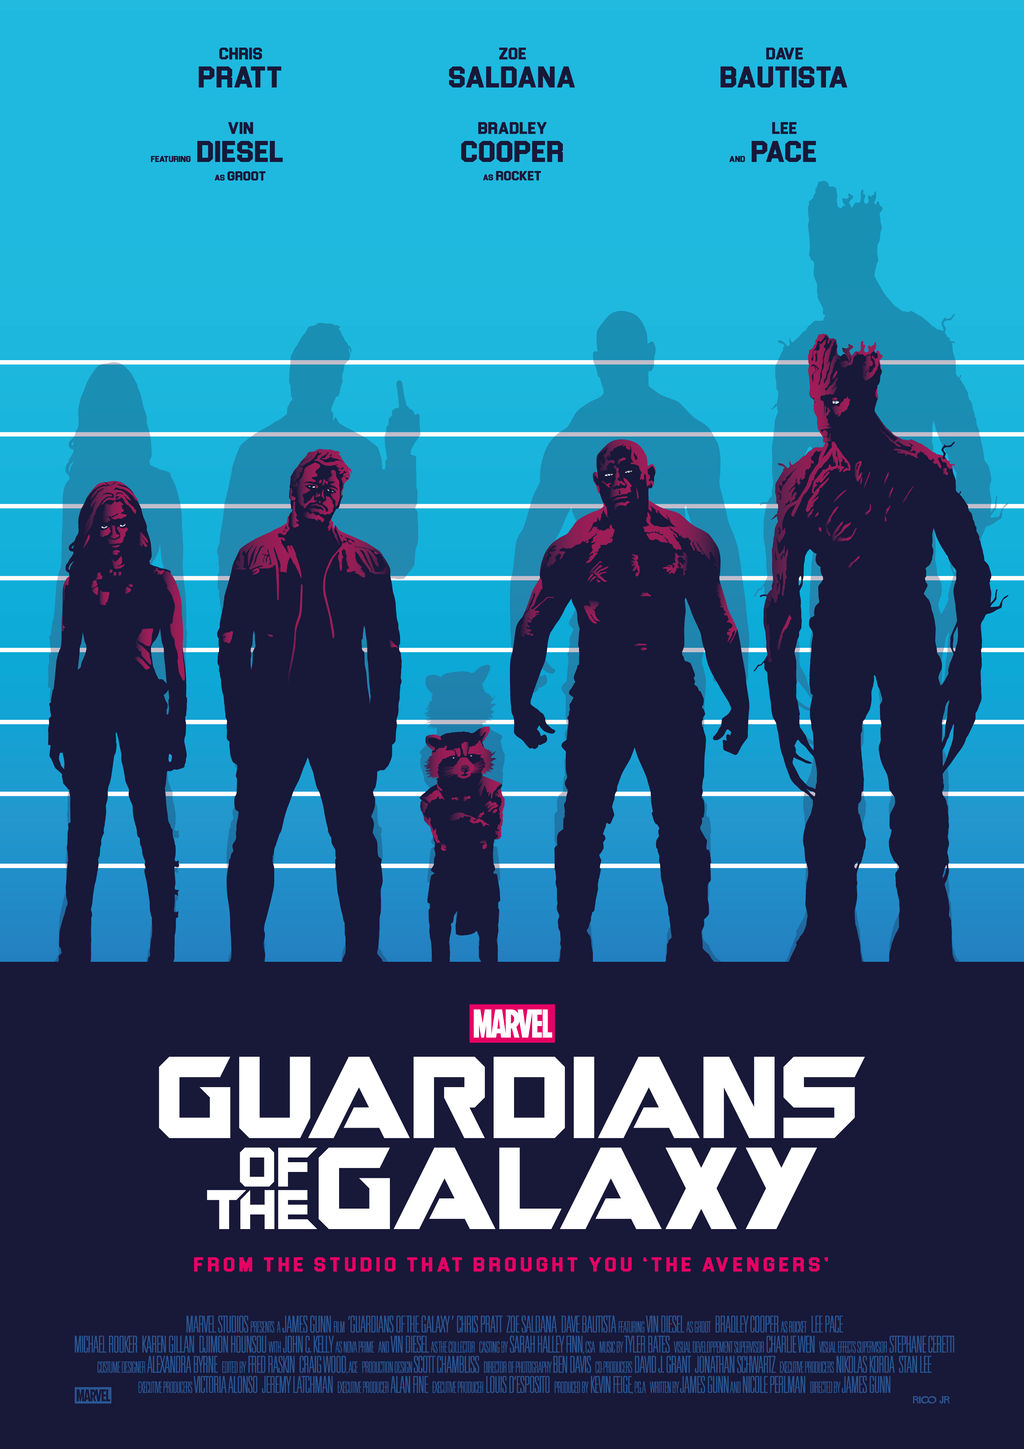 (1/2) USUAL GALAXY on OF by THE GUARDIANS Poster DeviantArt Art RicoJrCreation